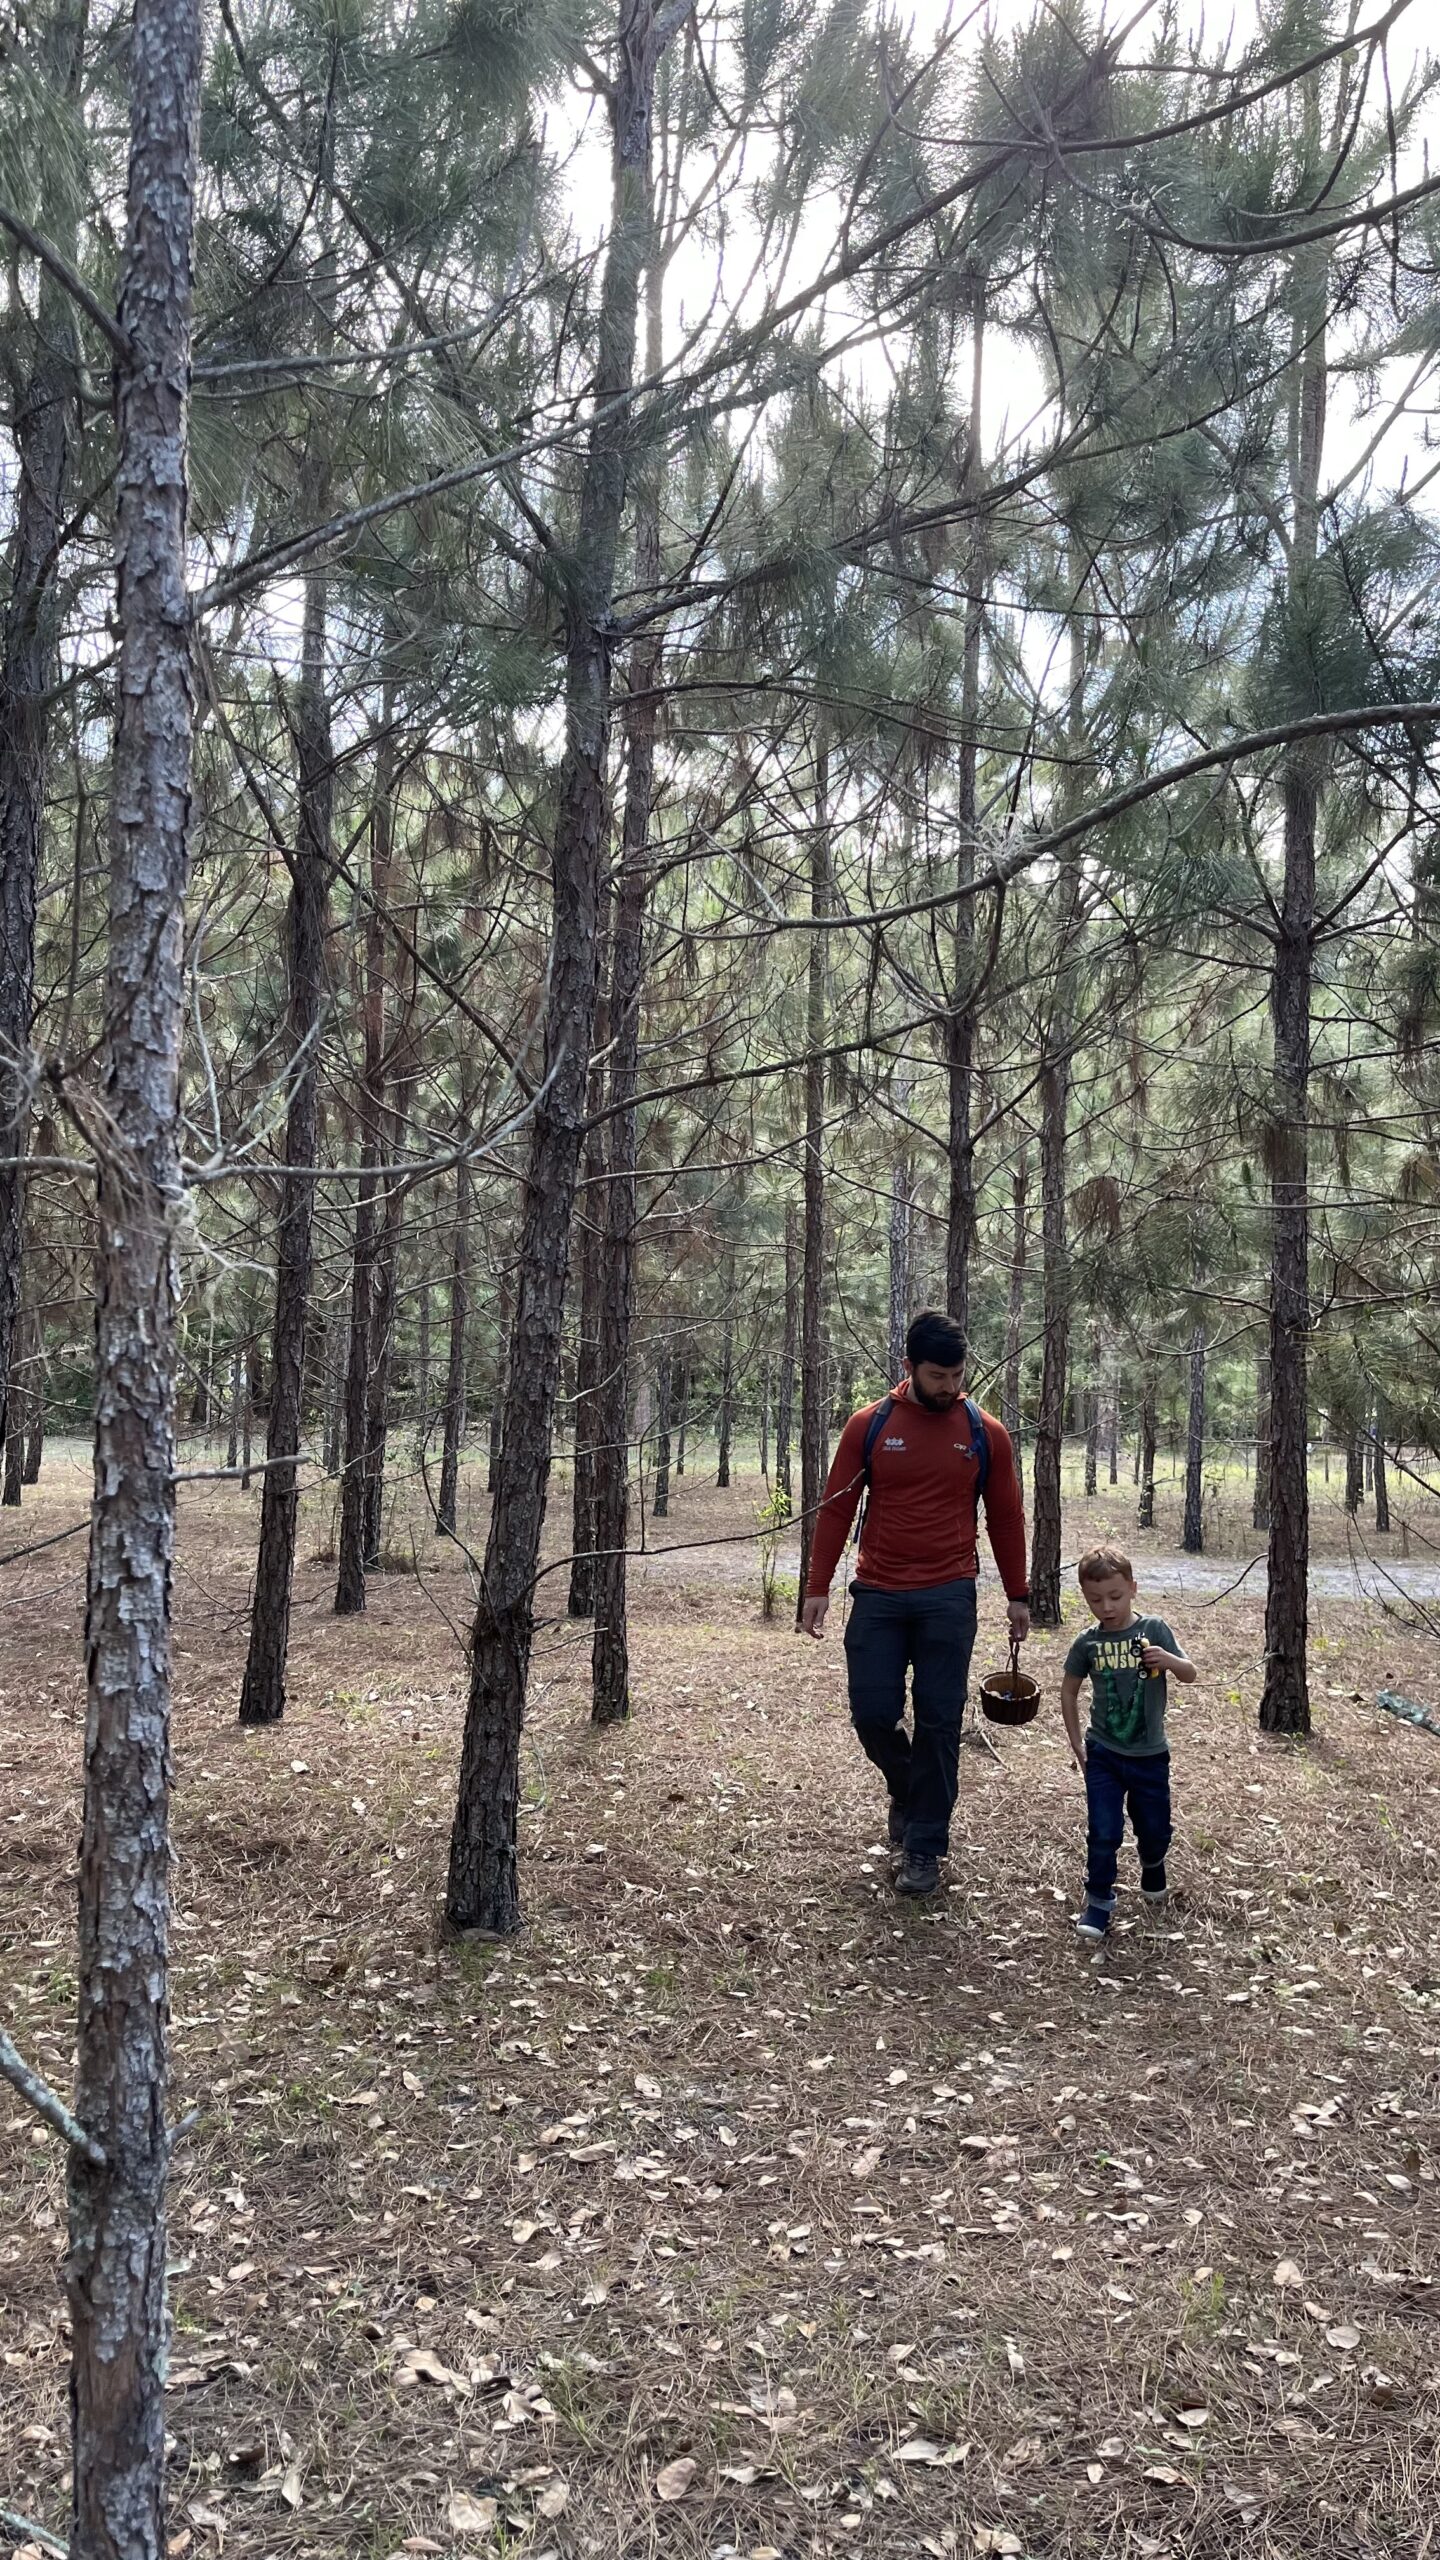 OT student walking with child in pine trees